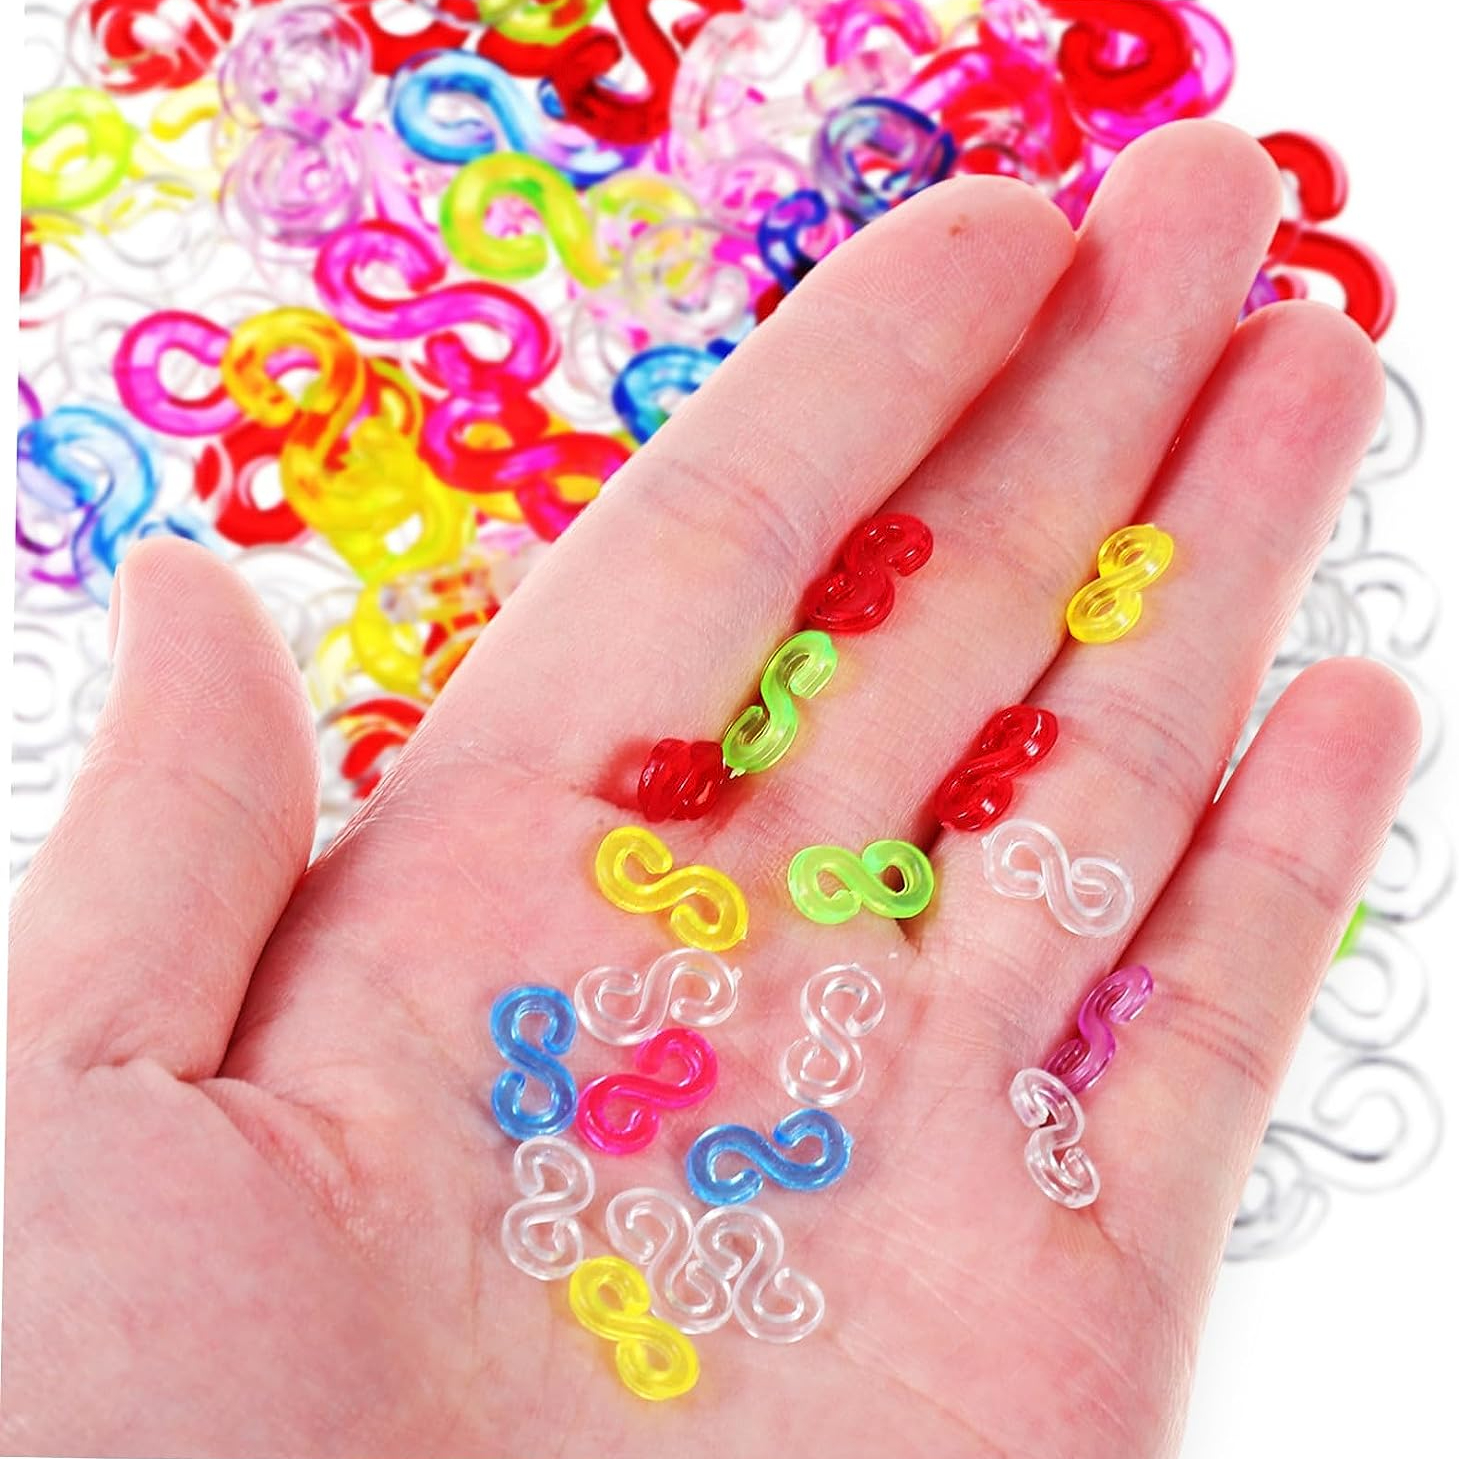 500pcs S Clips Rubber Band Plastic Hook For Charm Loom Bracelet Fefills Kit  Jewellery Making Supplies Accessories Wholesale